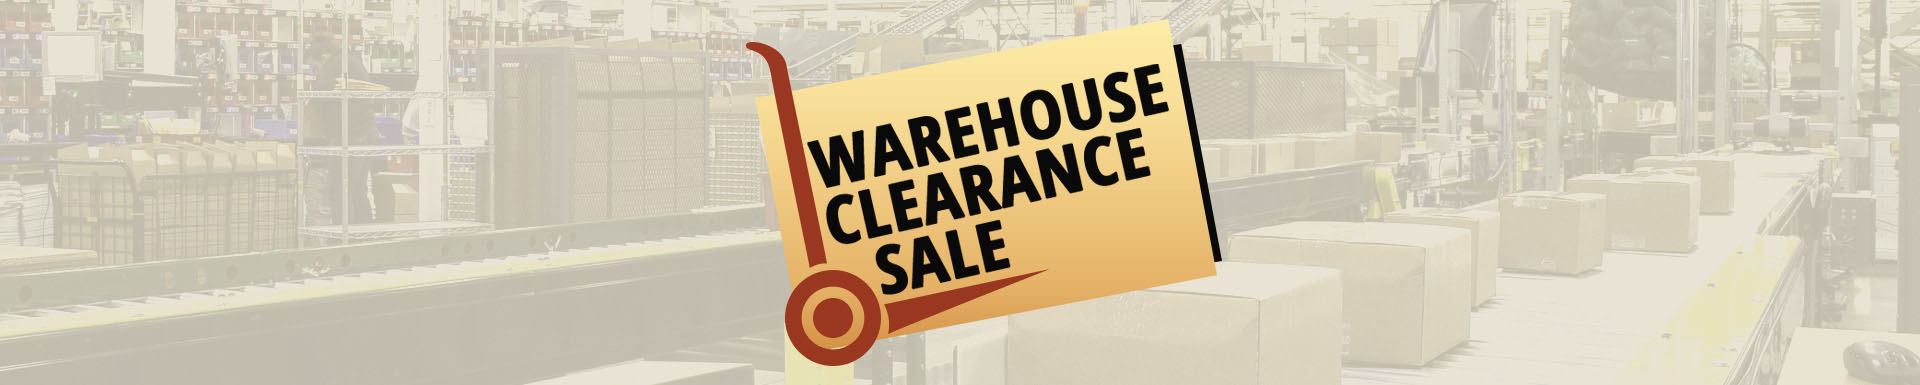 warehouse_clearance_sale_event_banner